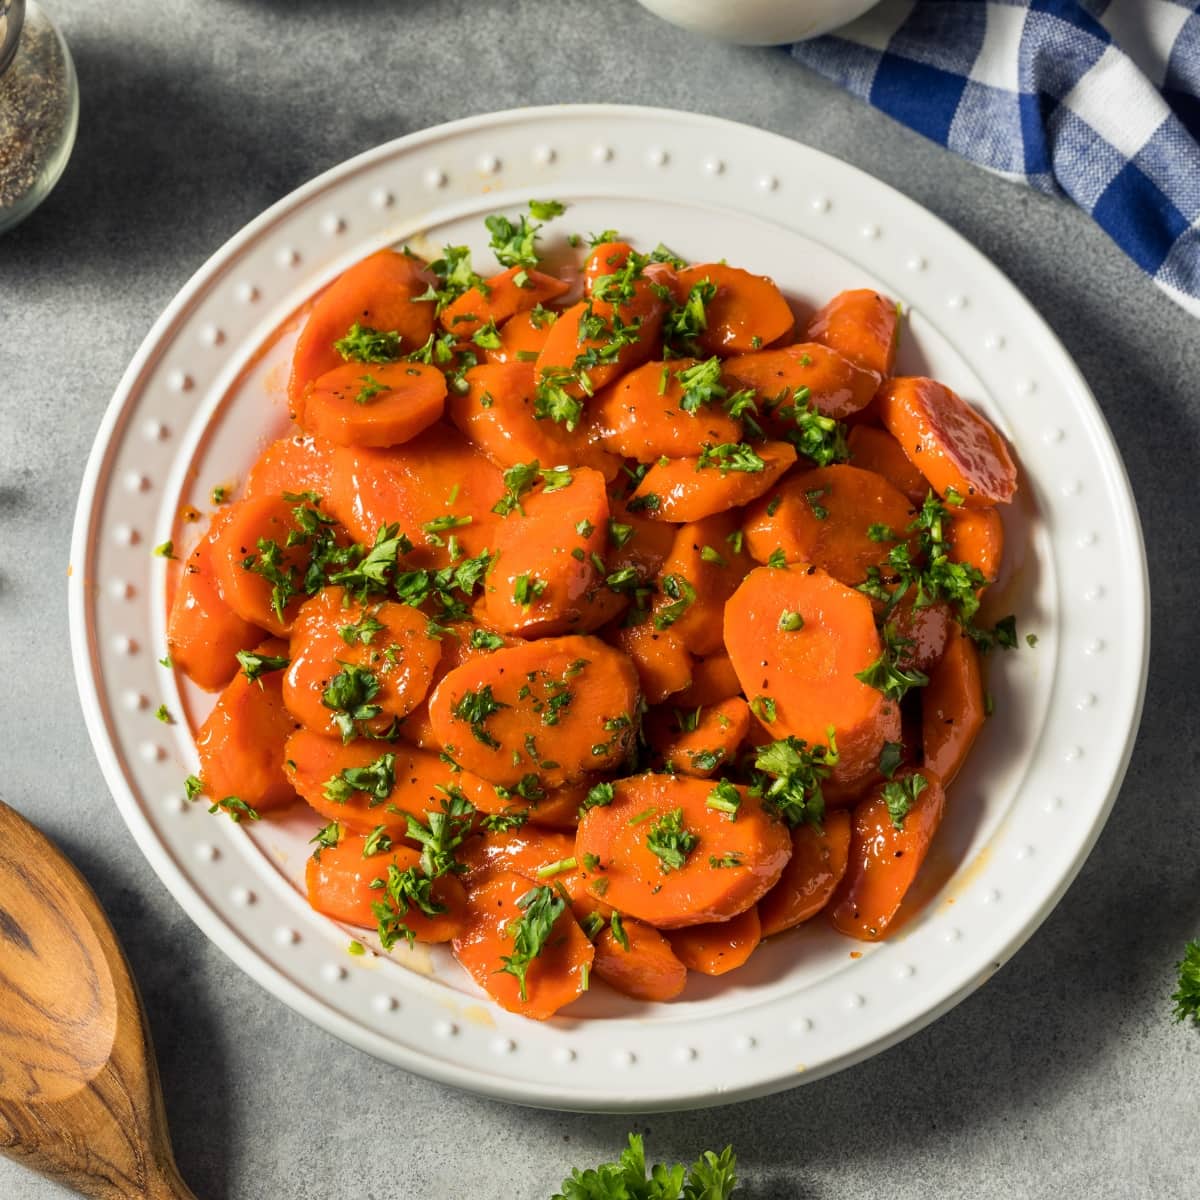 Candied Carrots Served on a Plate Garnished With Parsley
